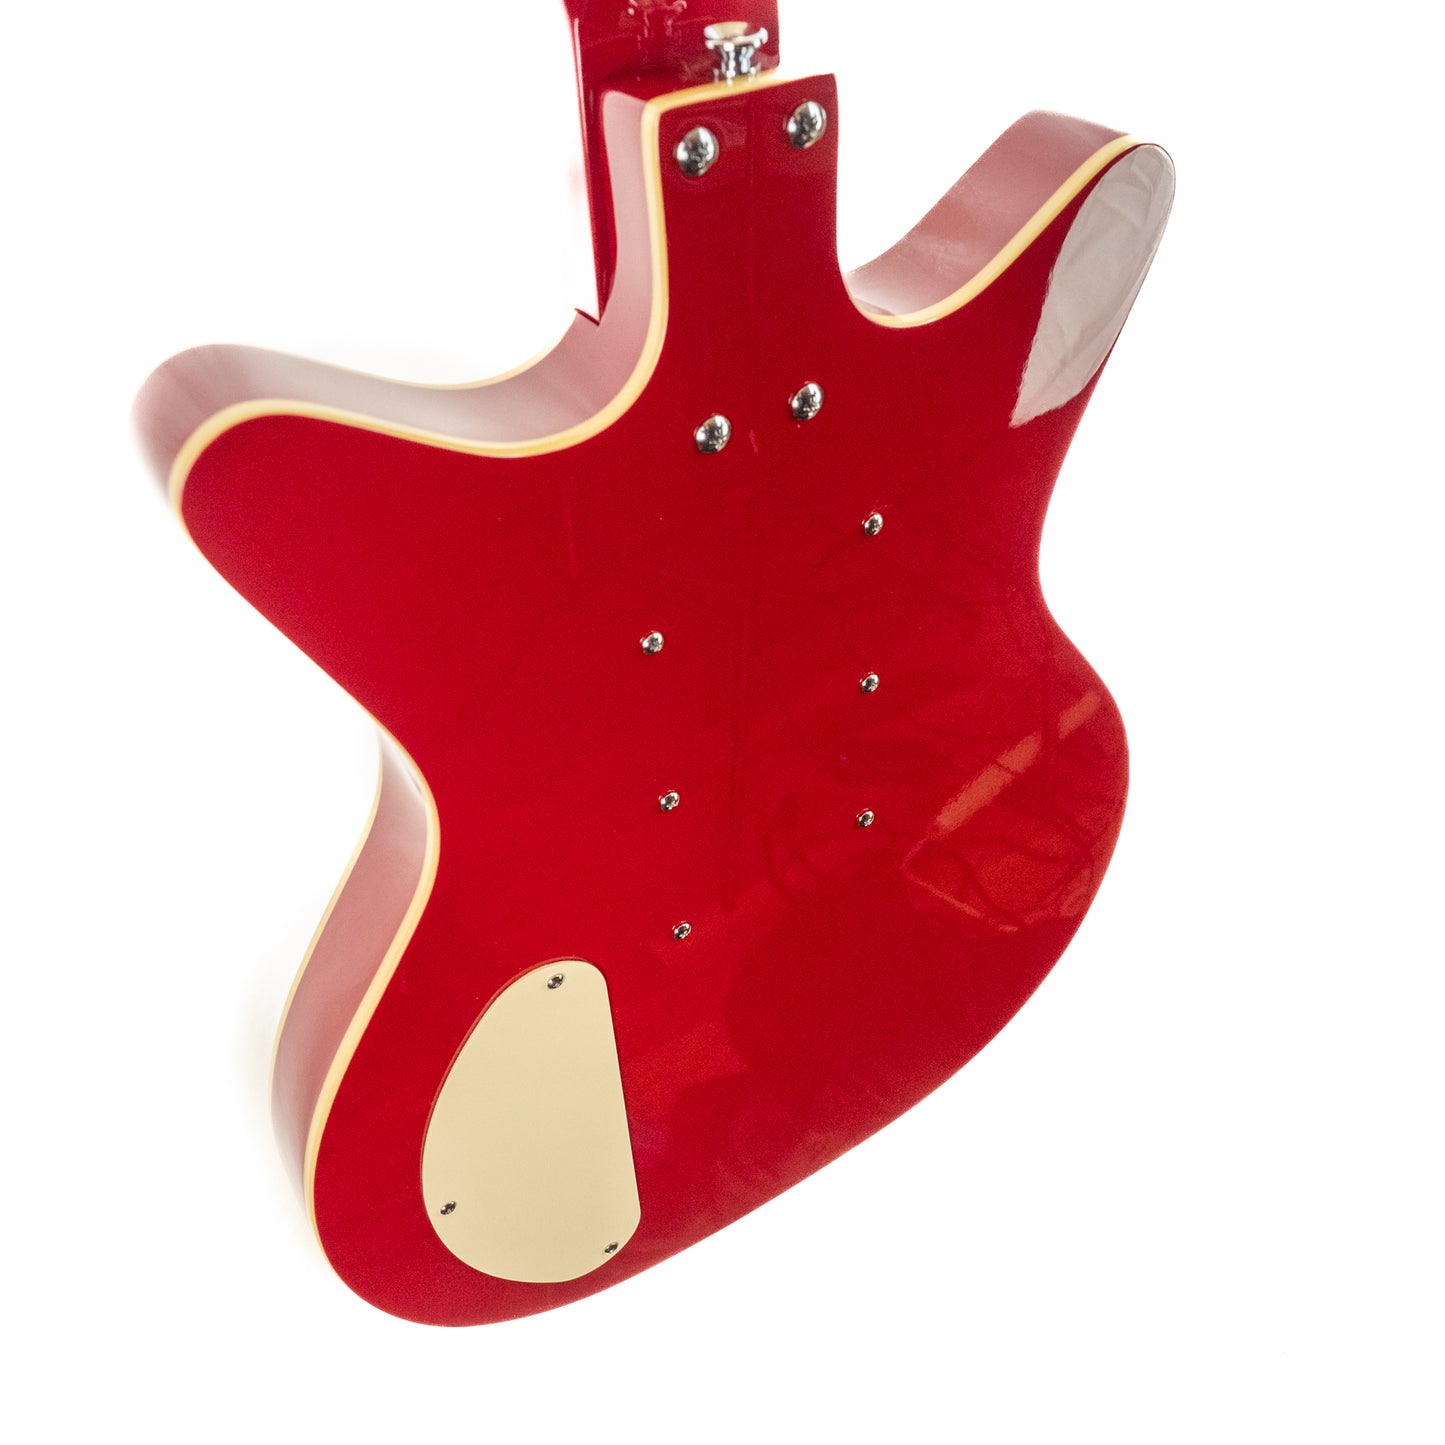 Danelectro 59 Triple Divine 3-lipstick pickup red only 6 lbs, 3 oz, new model!